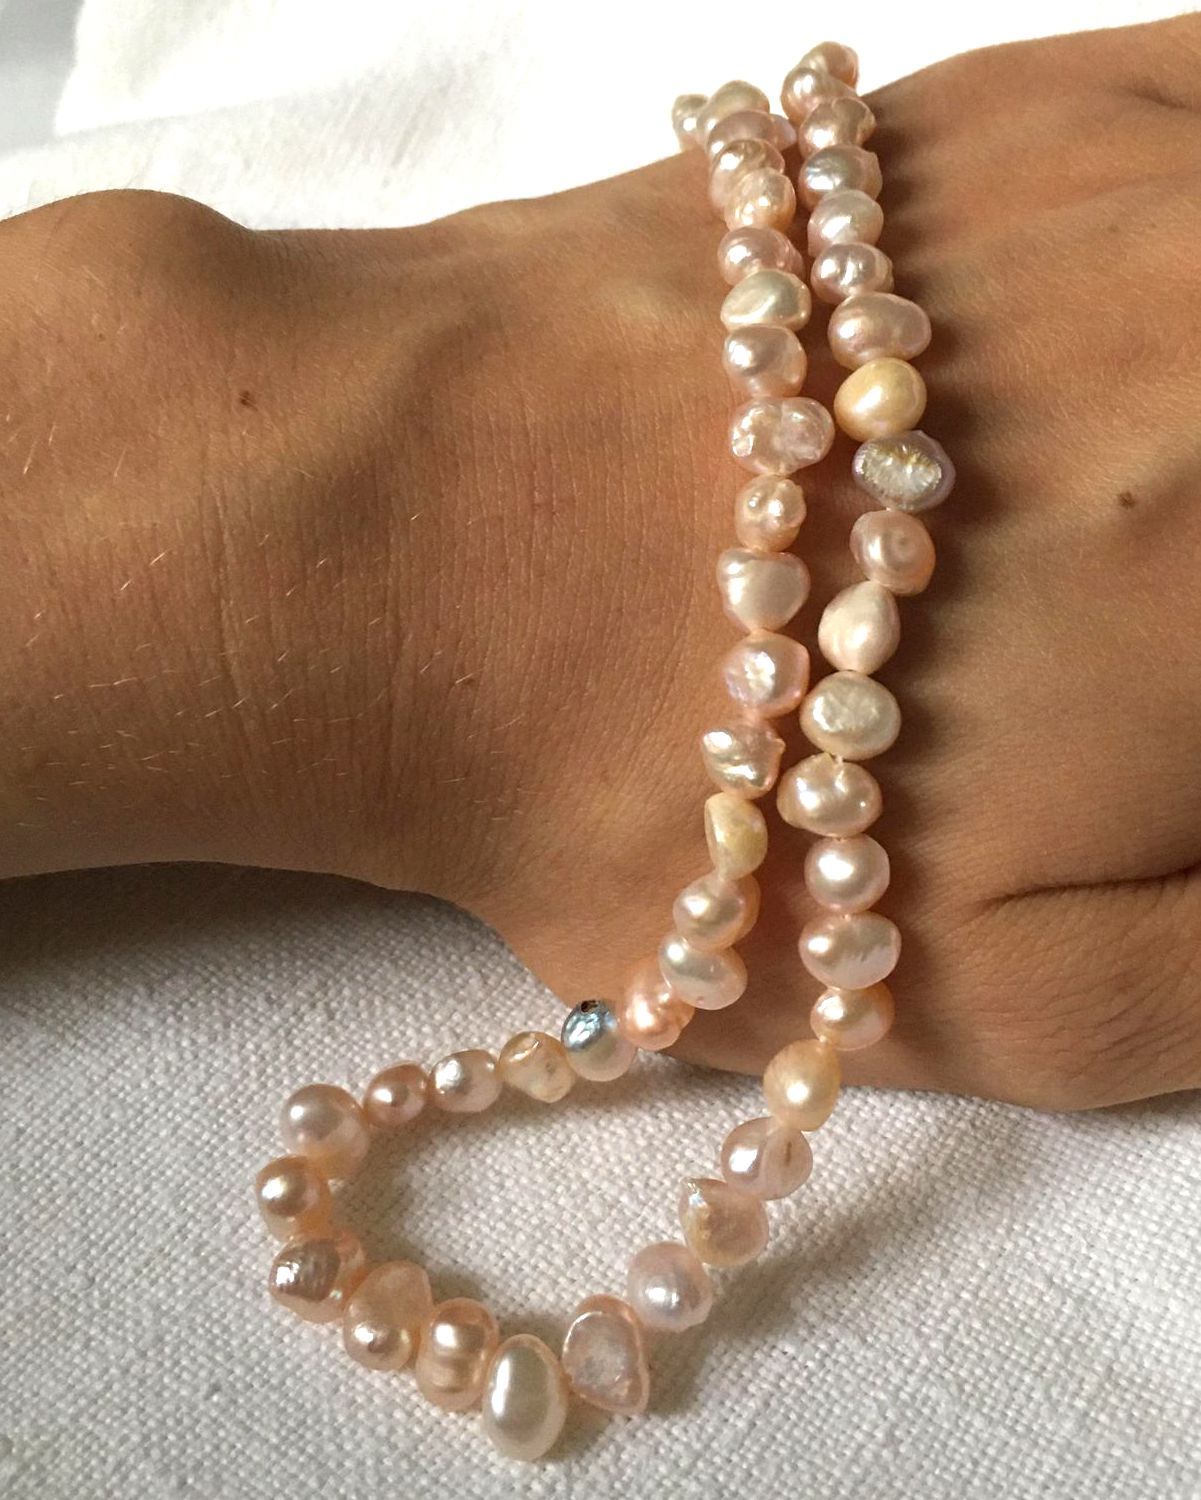 FINAL SALE - Treated Freshwater Cultured Pearl Blue Cord Chain Bracelet |  Sterling silver | Pandora US